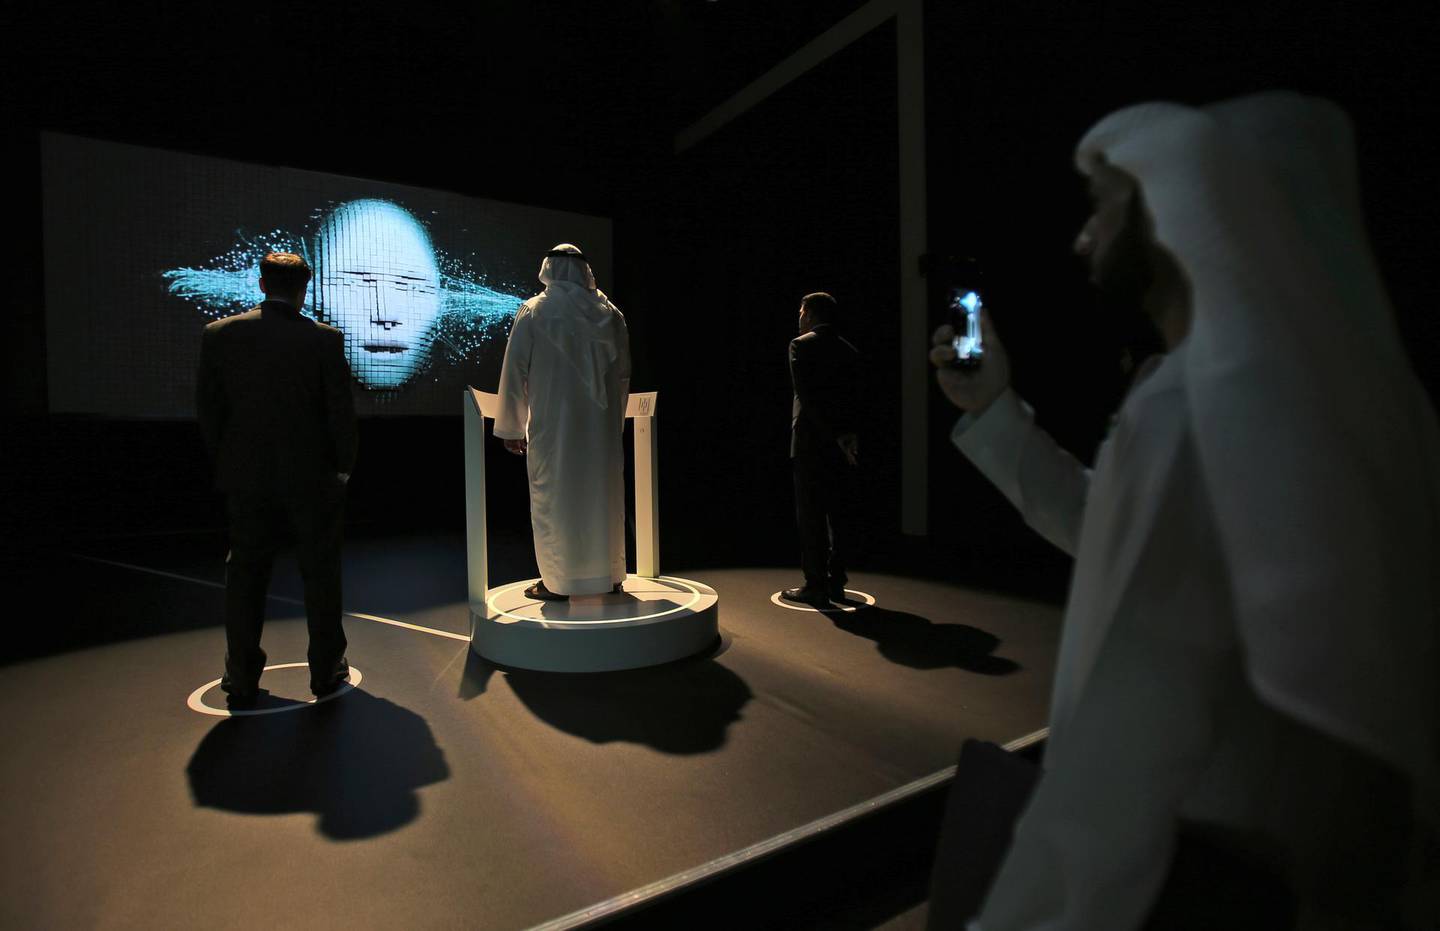 Governments staff from all over the world visit the Museum of the Future at the World Government Summit in Dubai, United Arab Emirates, Monday, Feb. 12, 2018. (AP Photo/Kamran Jebreili)